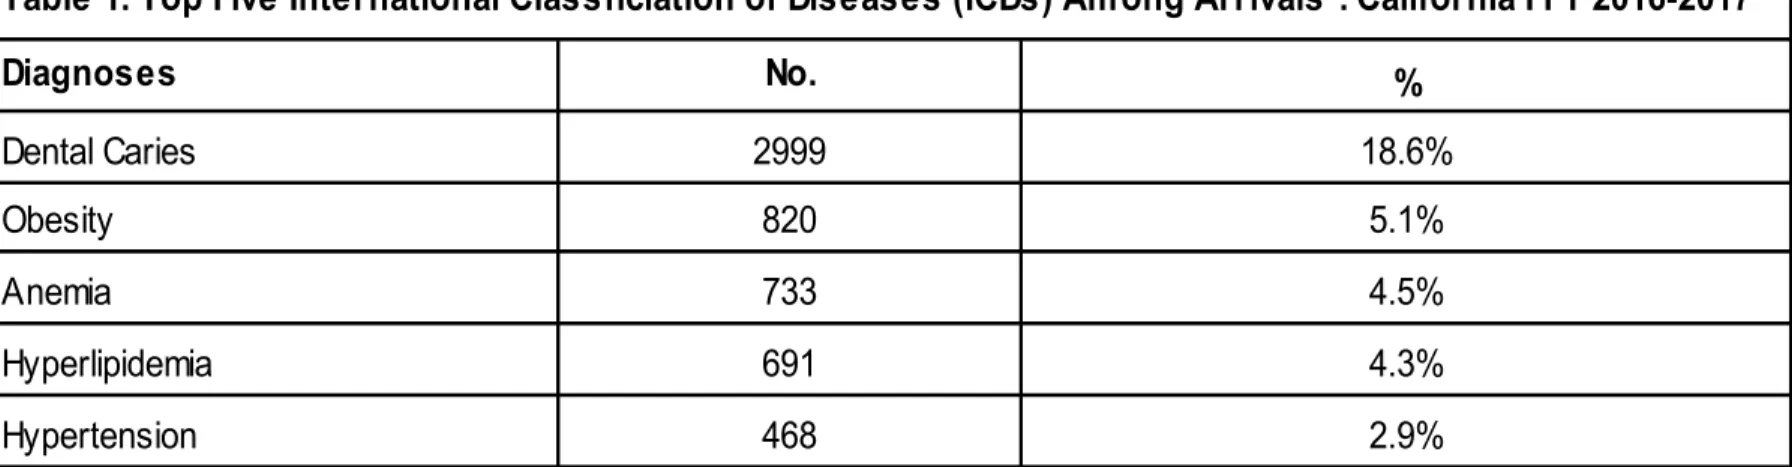 Table 1. Top Five International Classficiation of Diseases (ICDs) Among Arrivals*: California FFY 2016-2017